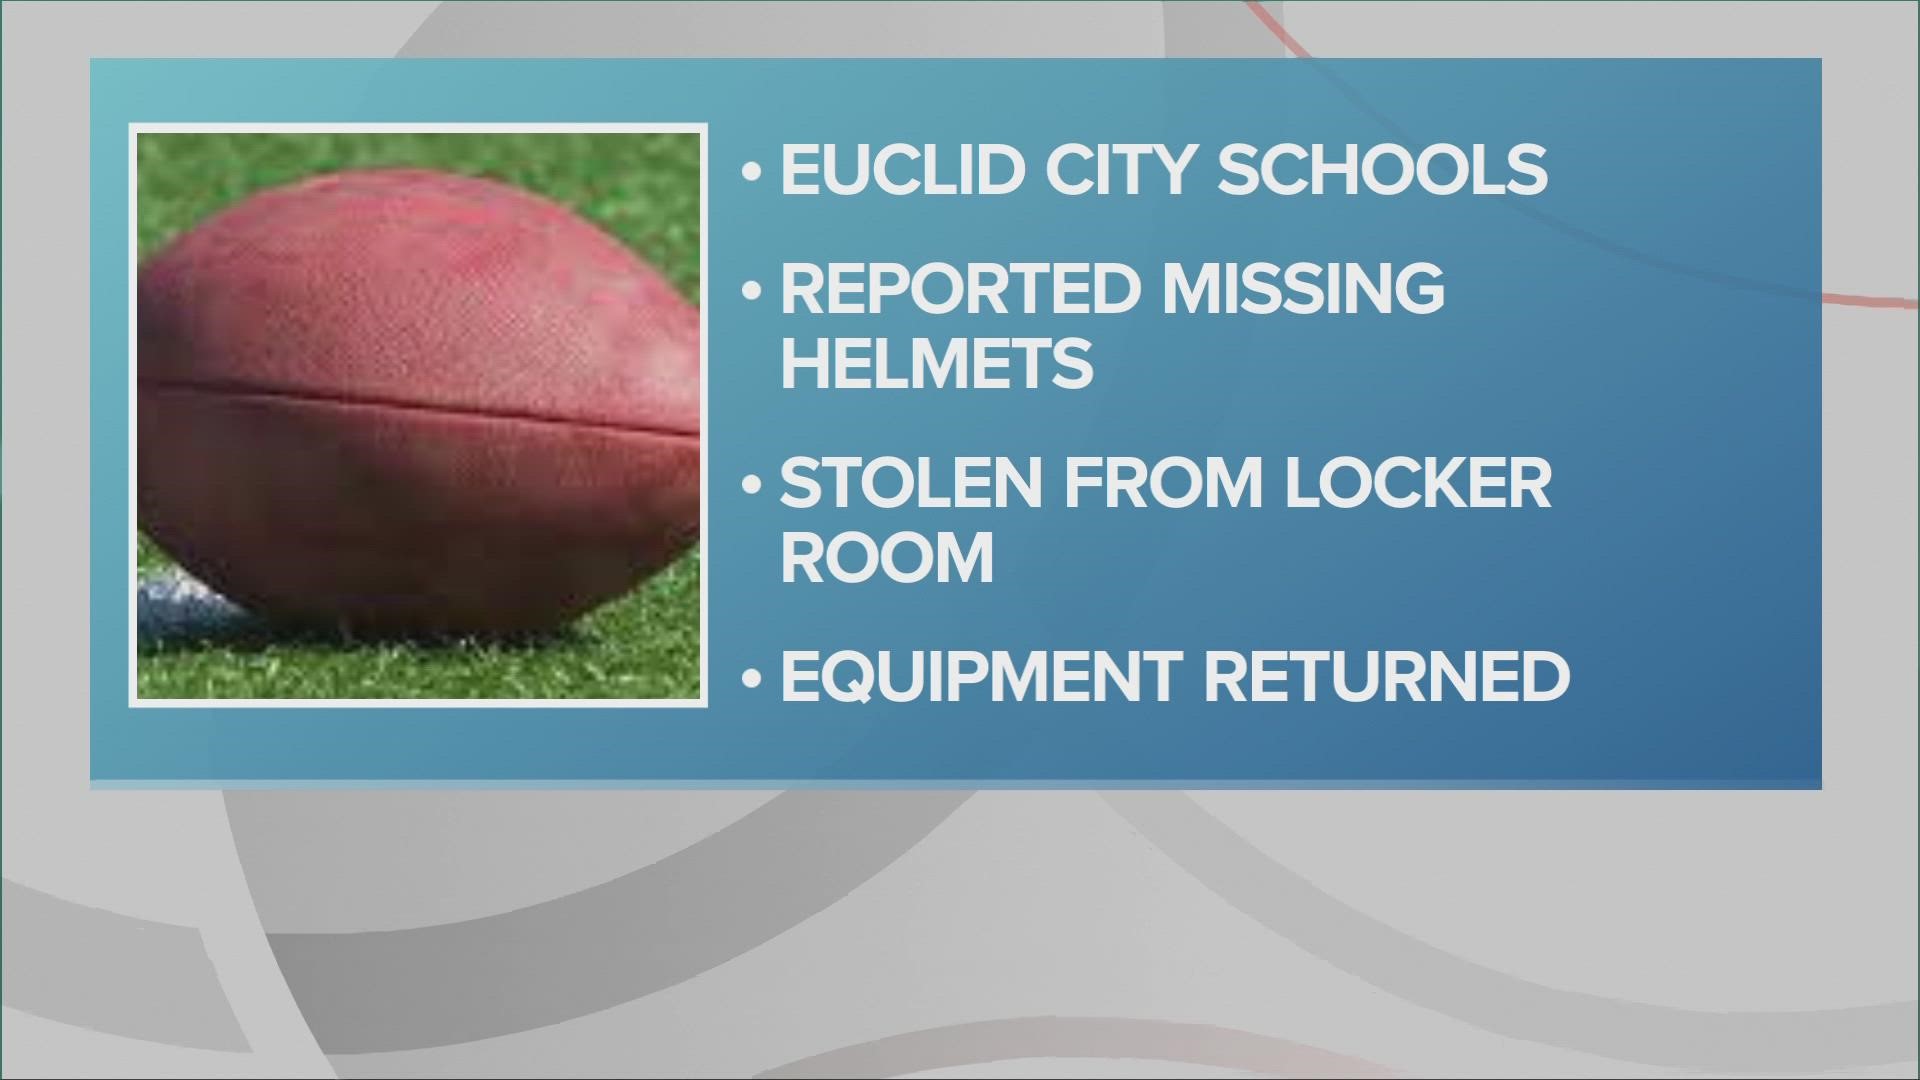 The news comes as teams across Northeast Ohio are dealing with helmet shortages. Officials say the equipment was taken to another district but later recovered.